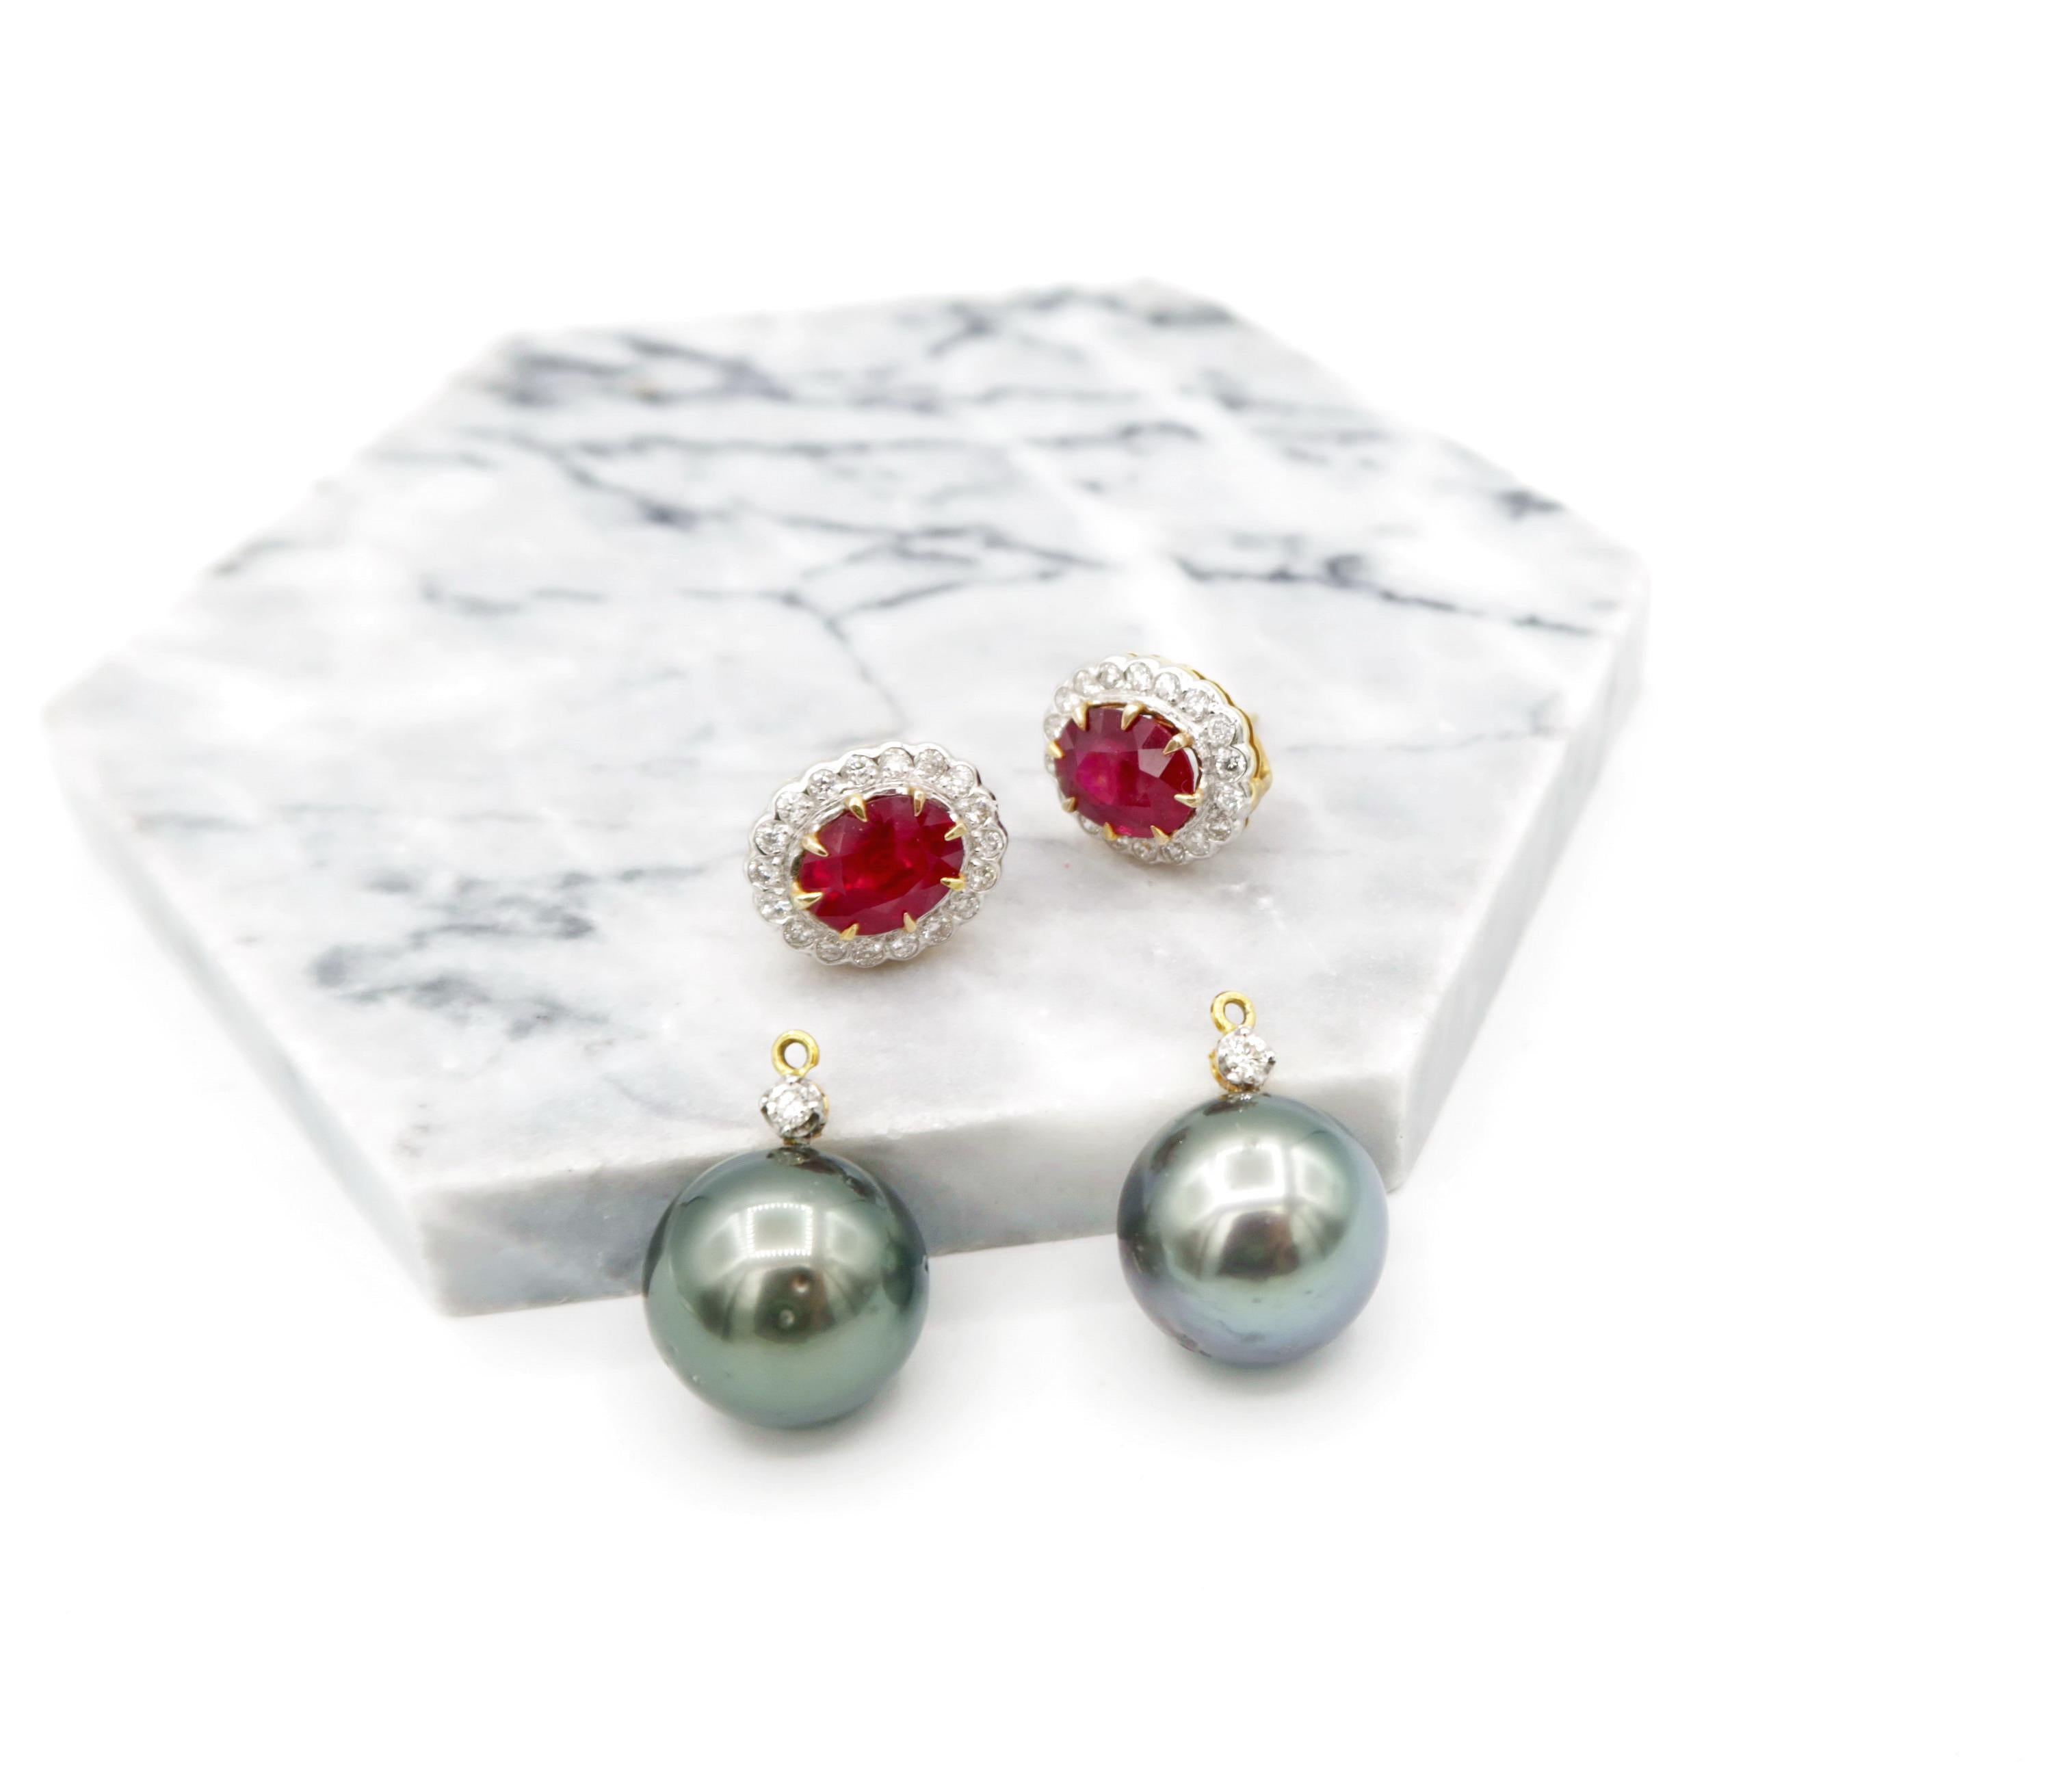 Oval-Shaped Ruby Drop Earrings in 18K Yellow Gold embellished with Diamond and Tahitian Pearls

Ruby : 4.67cts.
Diamond : 0.66ct.
Gold : 18K yellow gold 6.928g.
Pearls: Tahitian Pearls 2pcs.